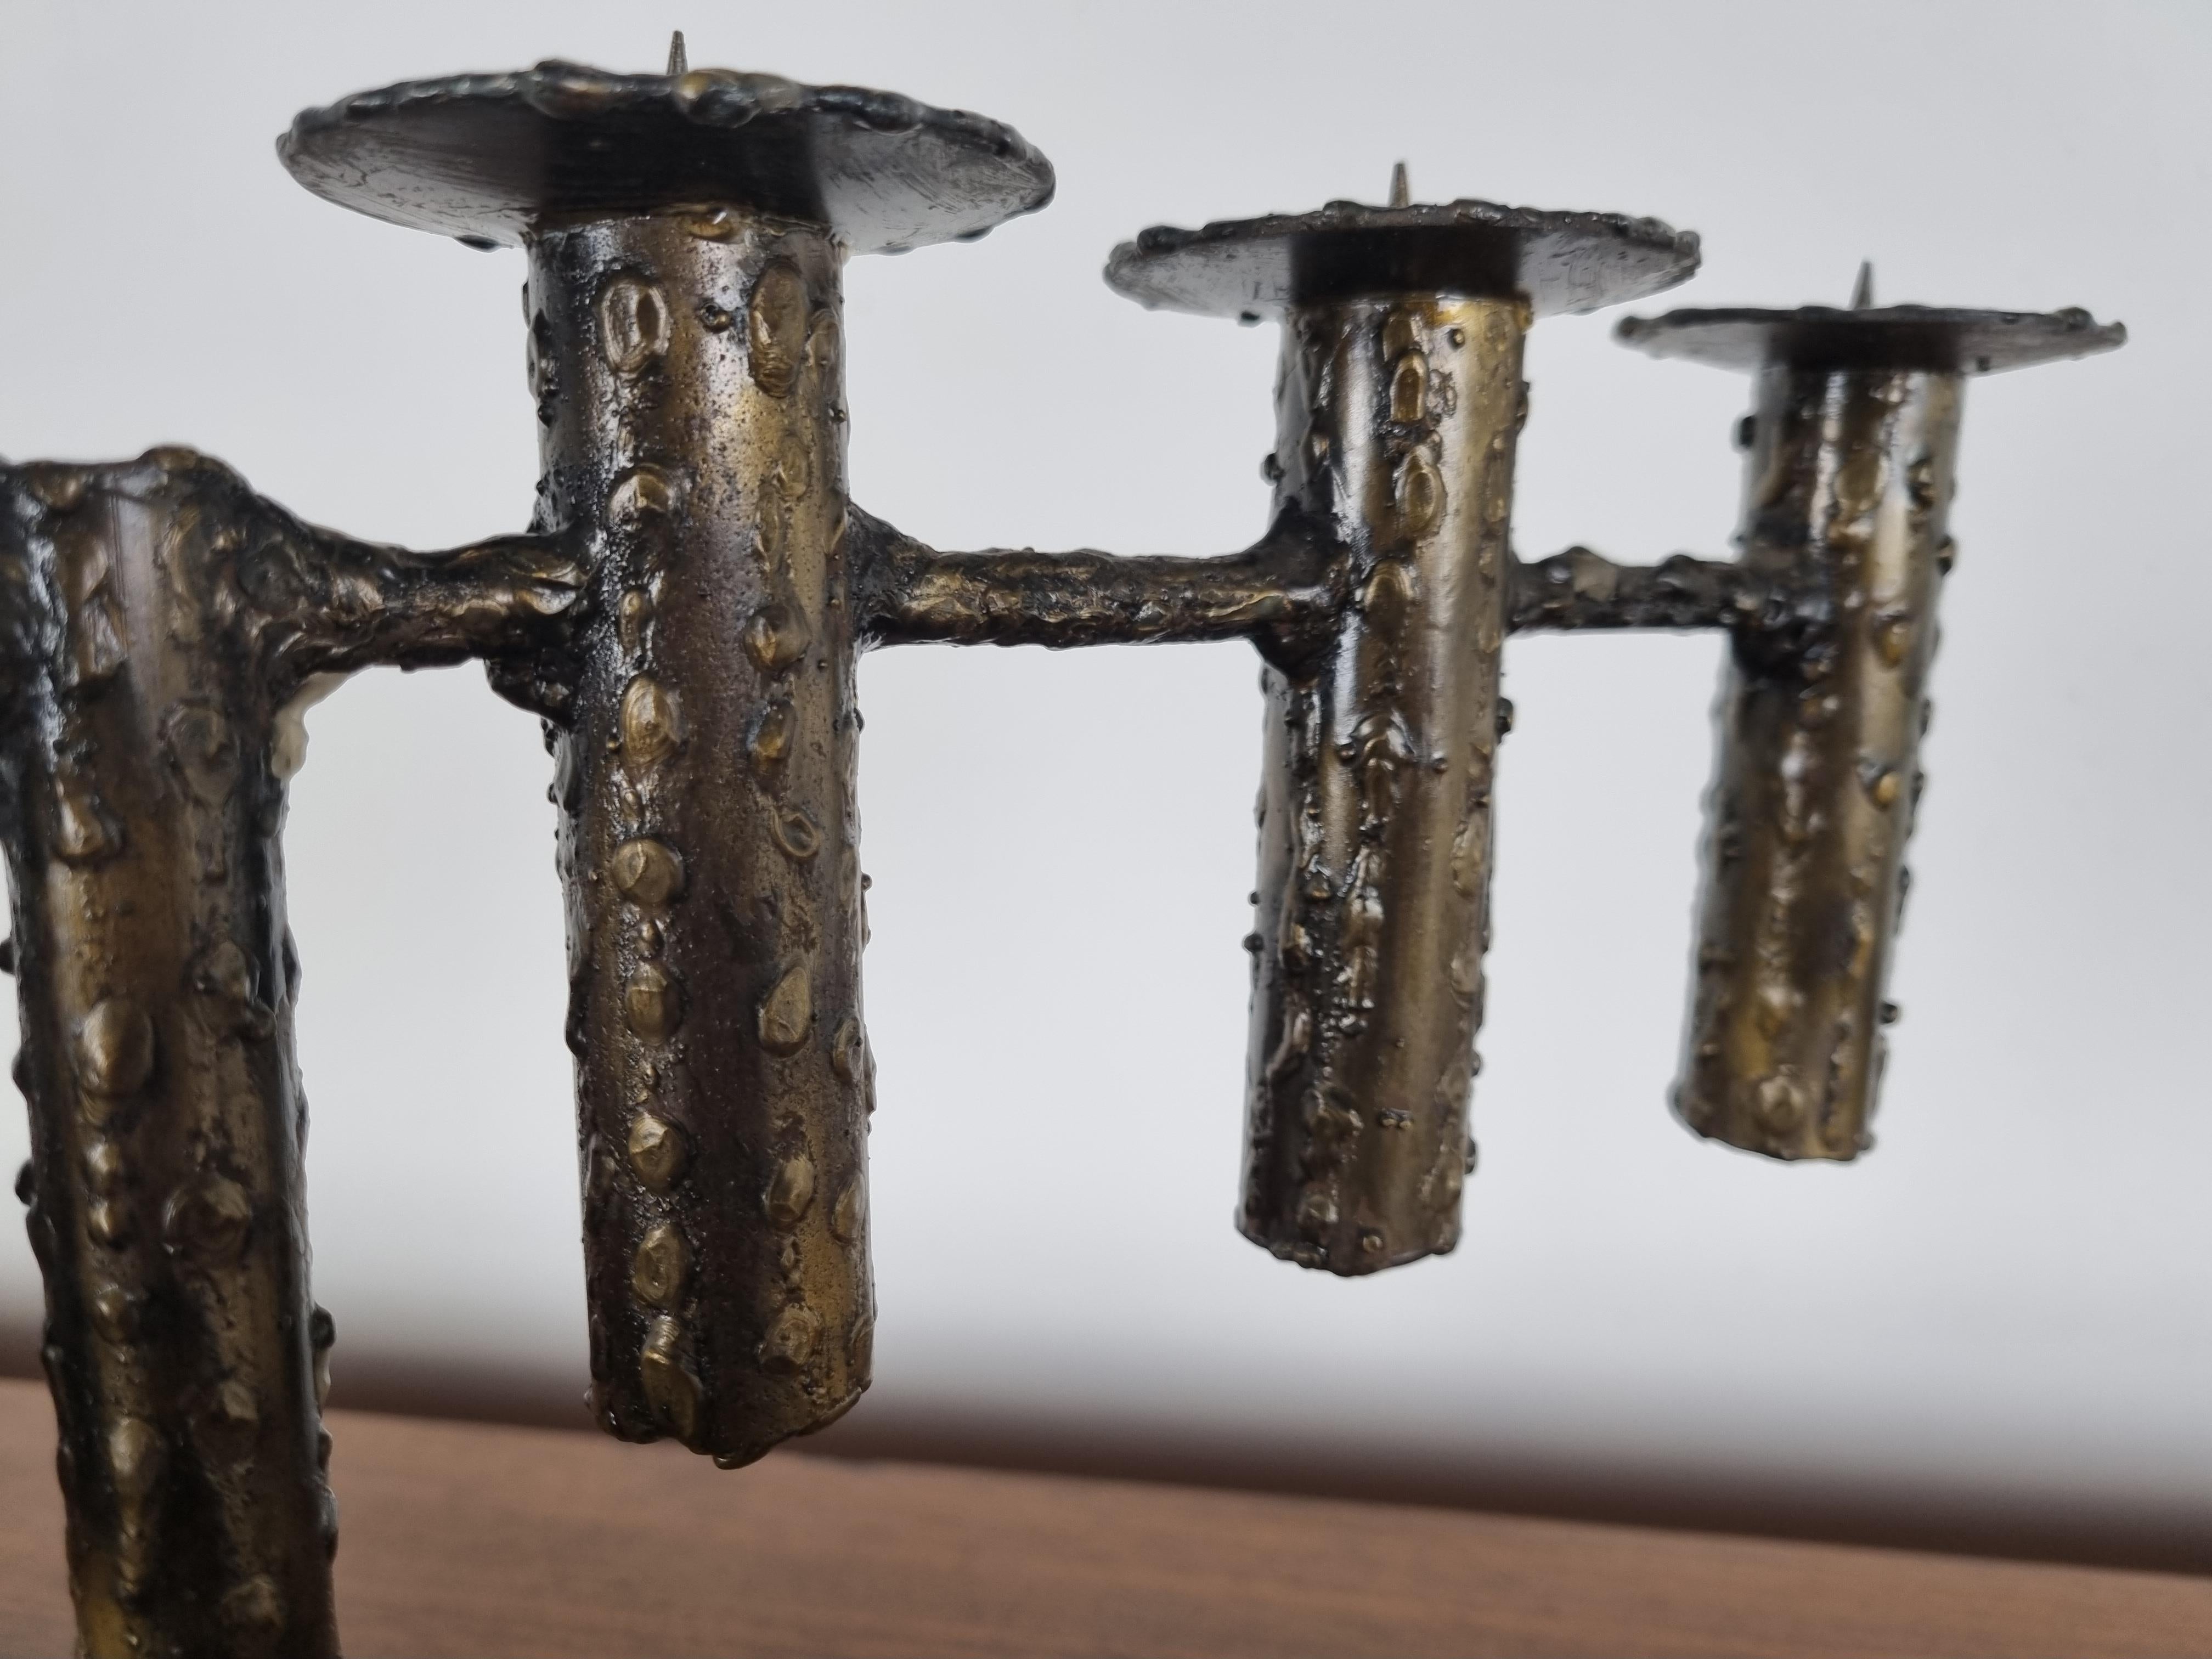 Vintage brutalist torch cut metal candle holder with 6 arms.

Beautiful and timeless piece which is very decorative.

The Brut design is very attractive.

Very good condition

1970s - Germany

Dimension:
Height: 26cm/10.23